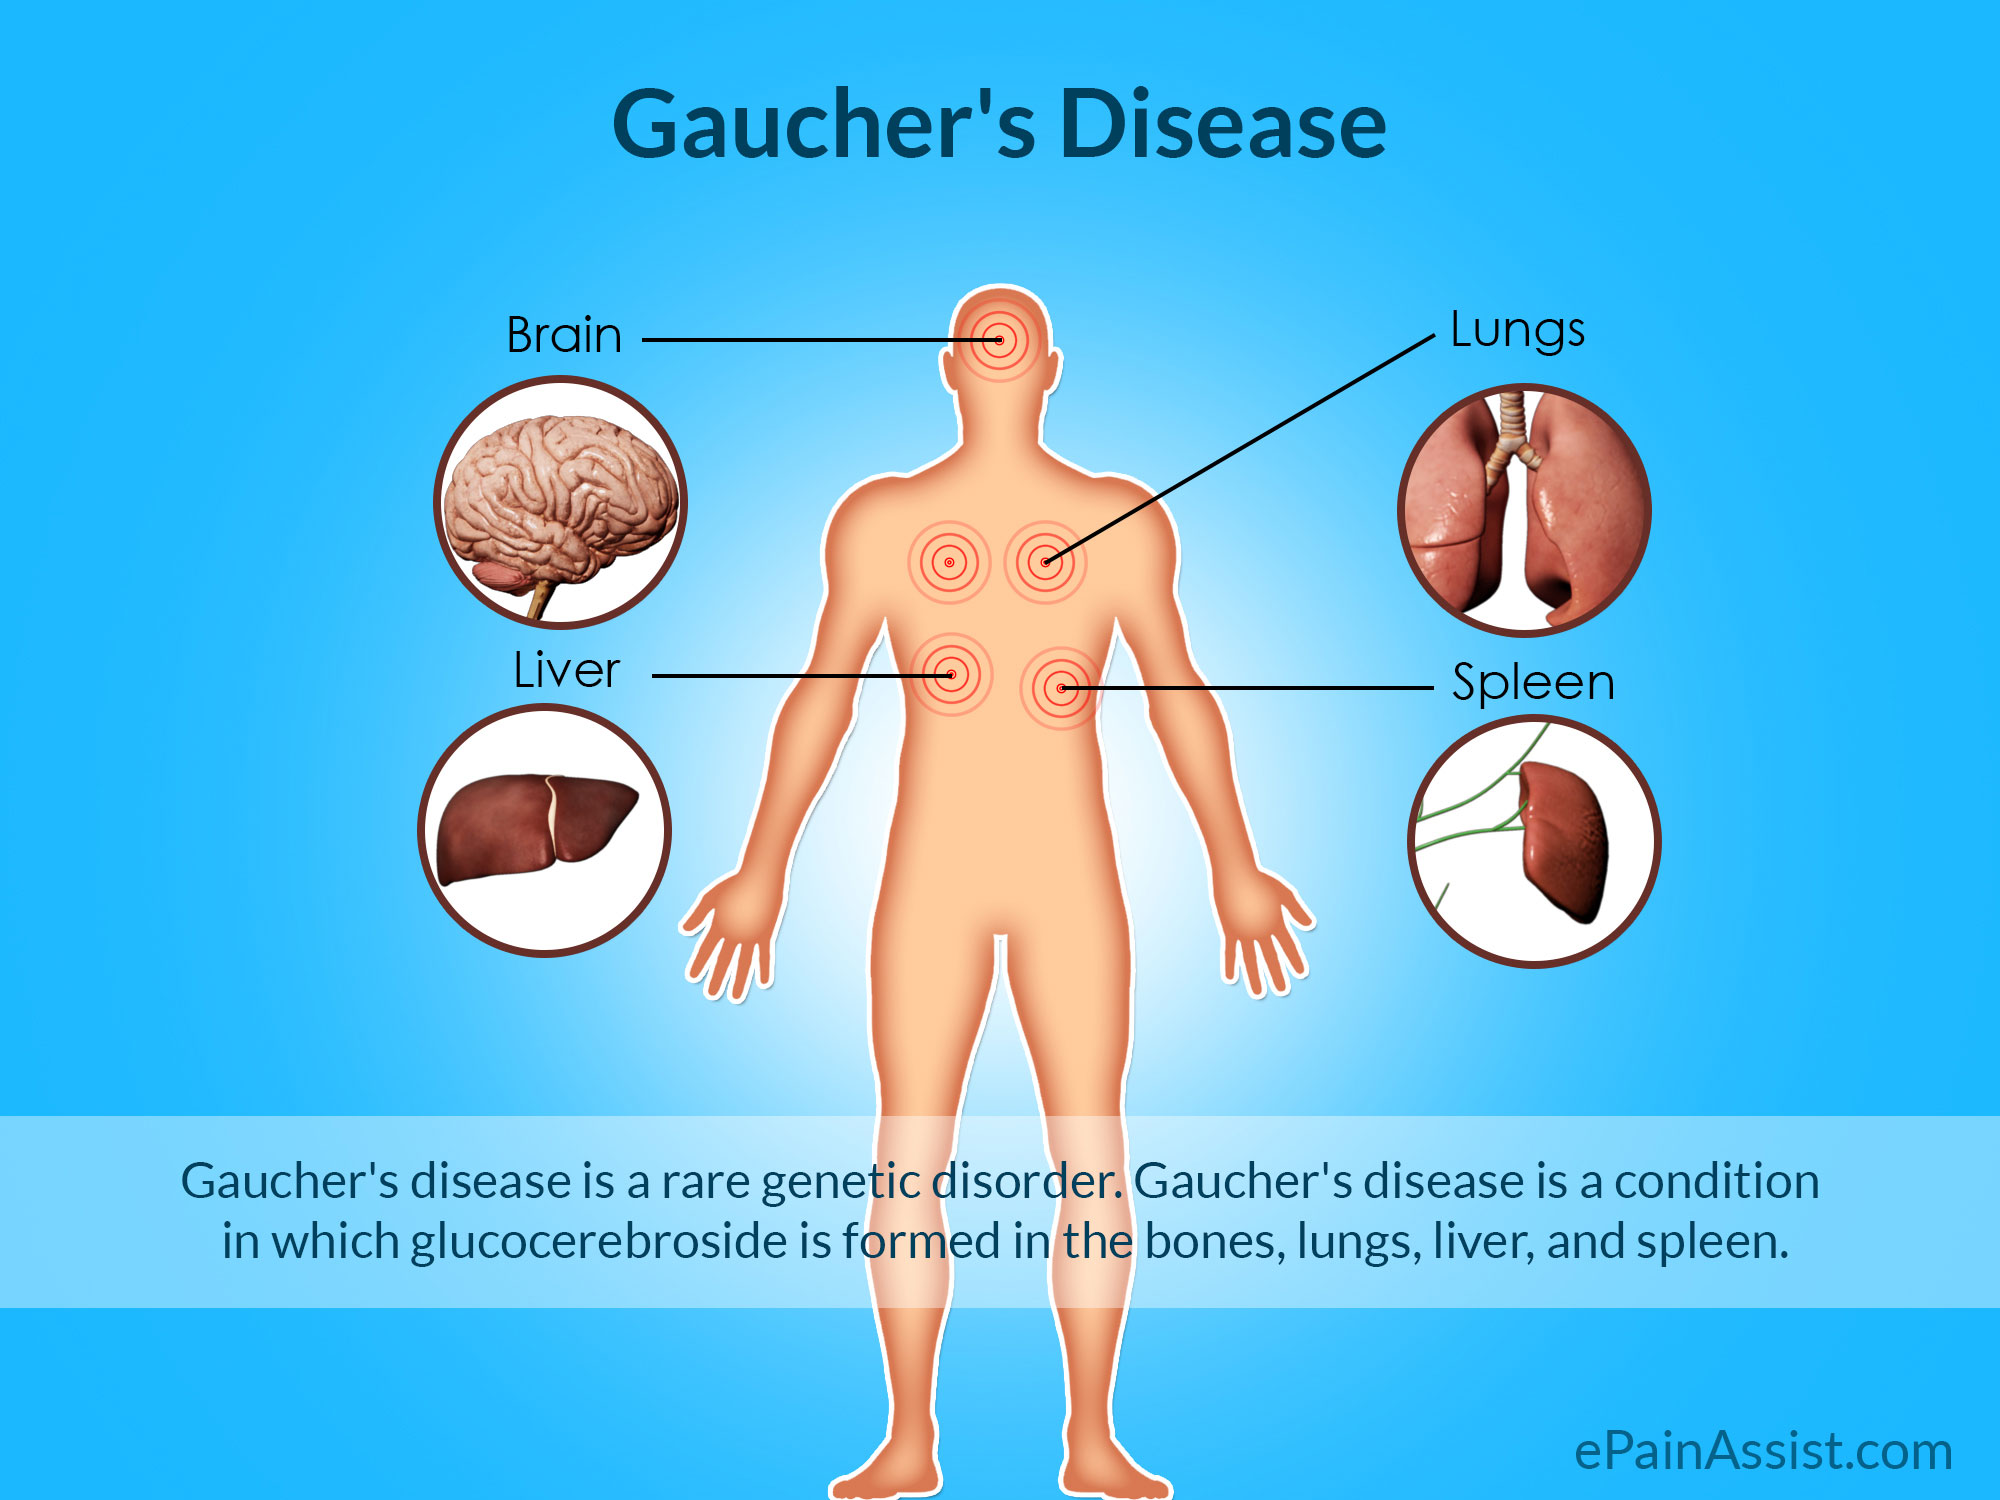 What Type Of Care Do Gaucher Diseased People Need